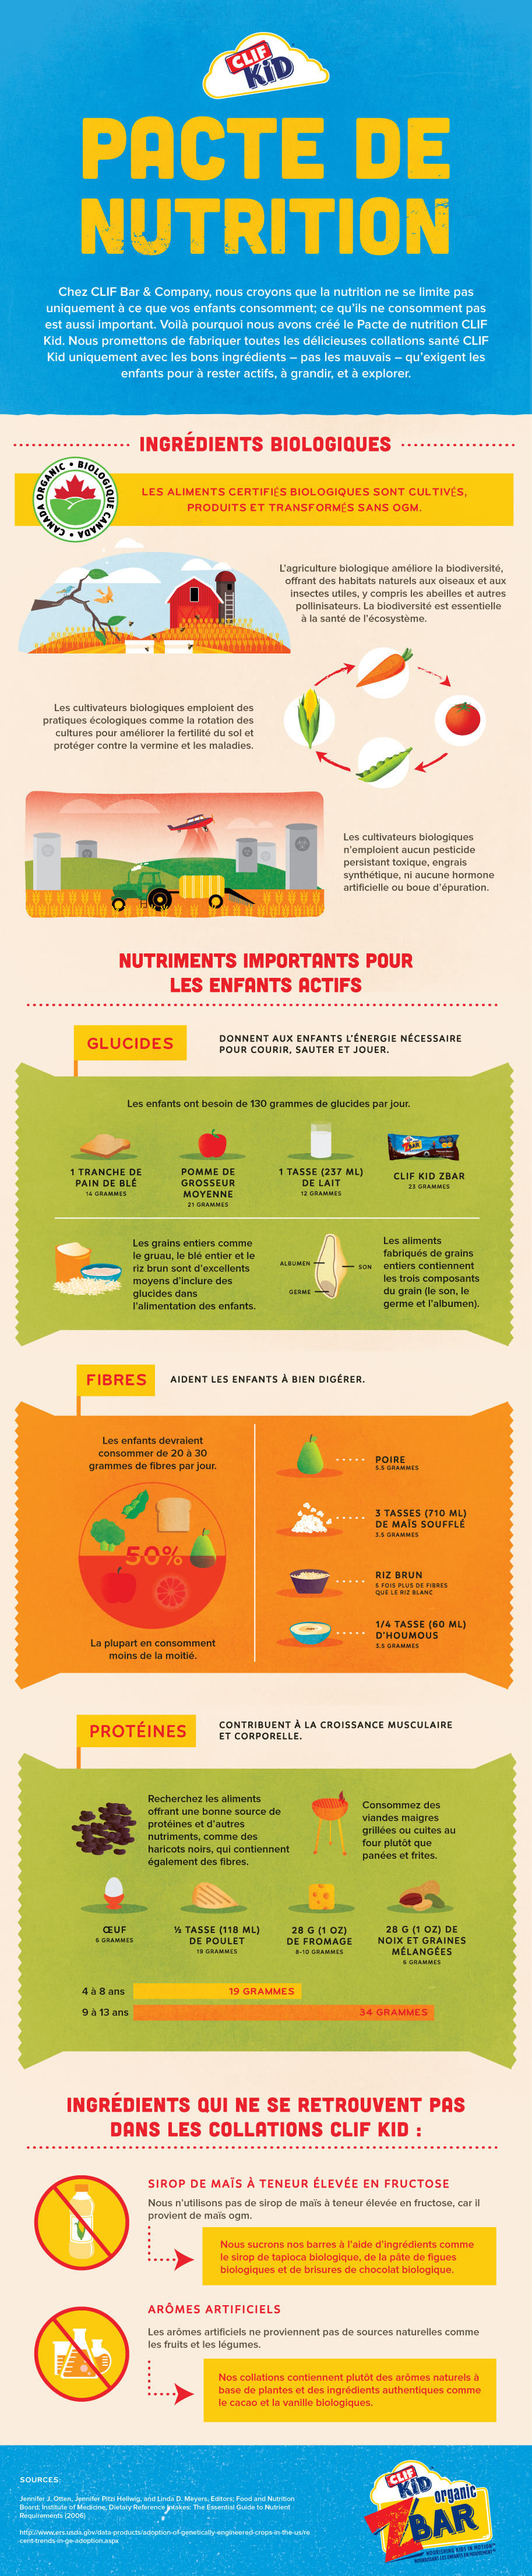 CLIF Kid Nutrition Pact Infographic – French Canadian version